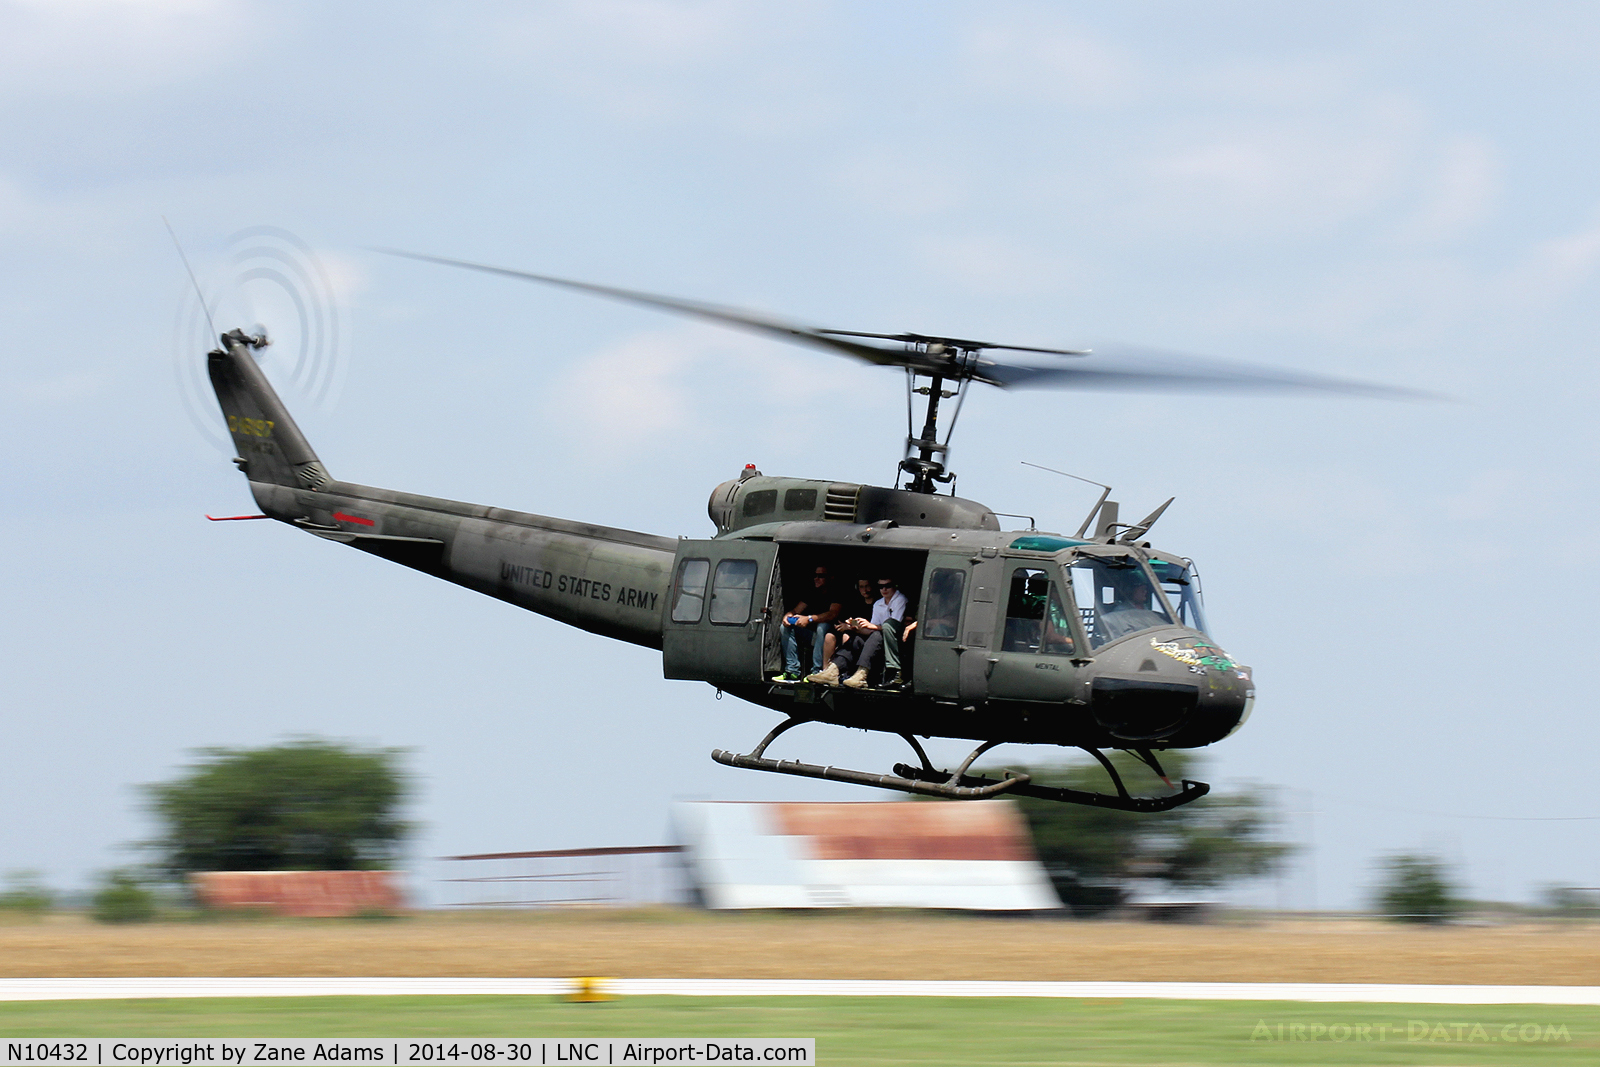 N10432, 1968 Bell UH-1H Iroquois C/N 10856 (68-16197), At the 2014 Warbirds on Parade